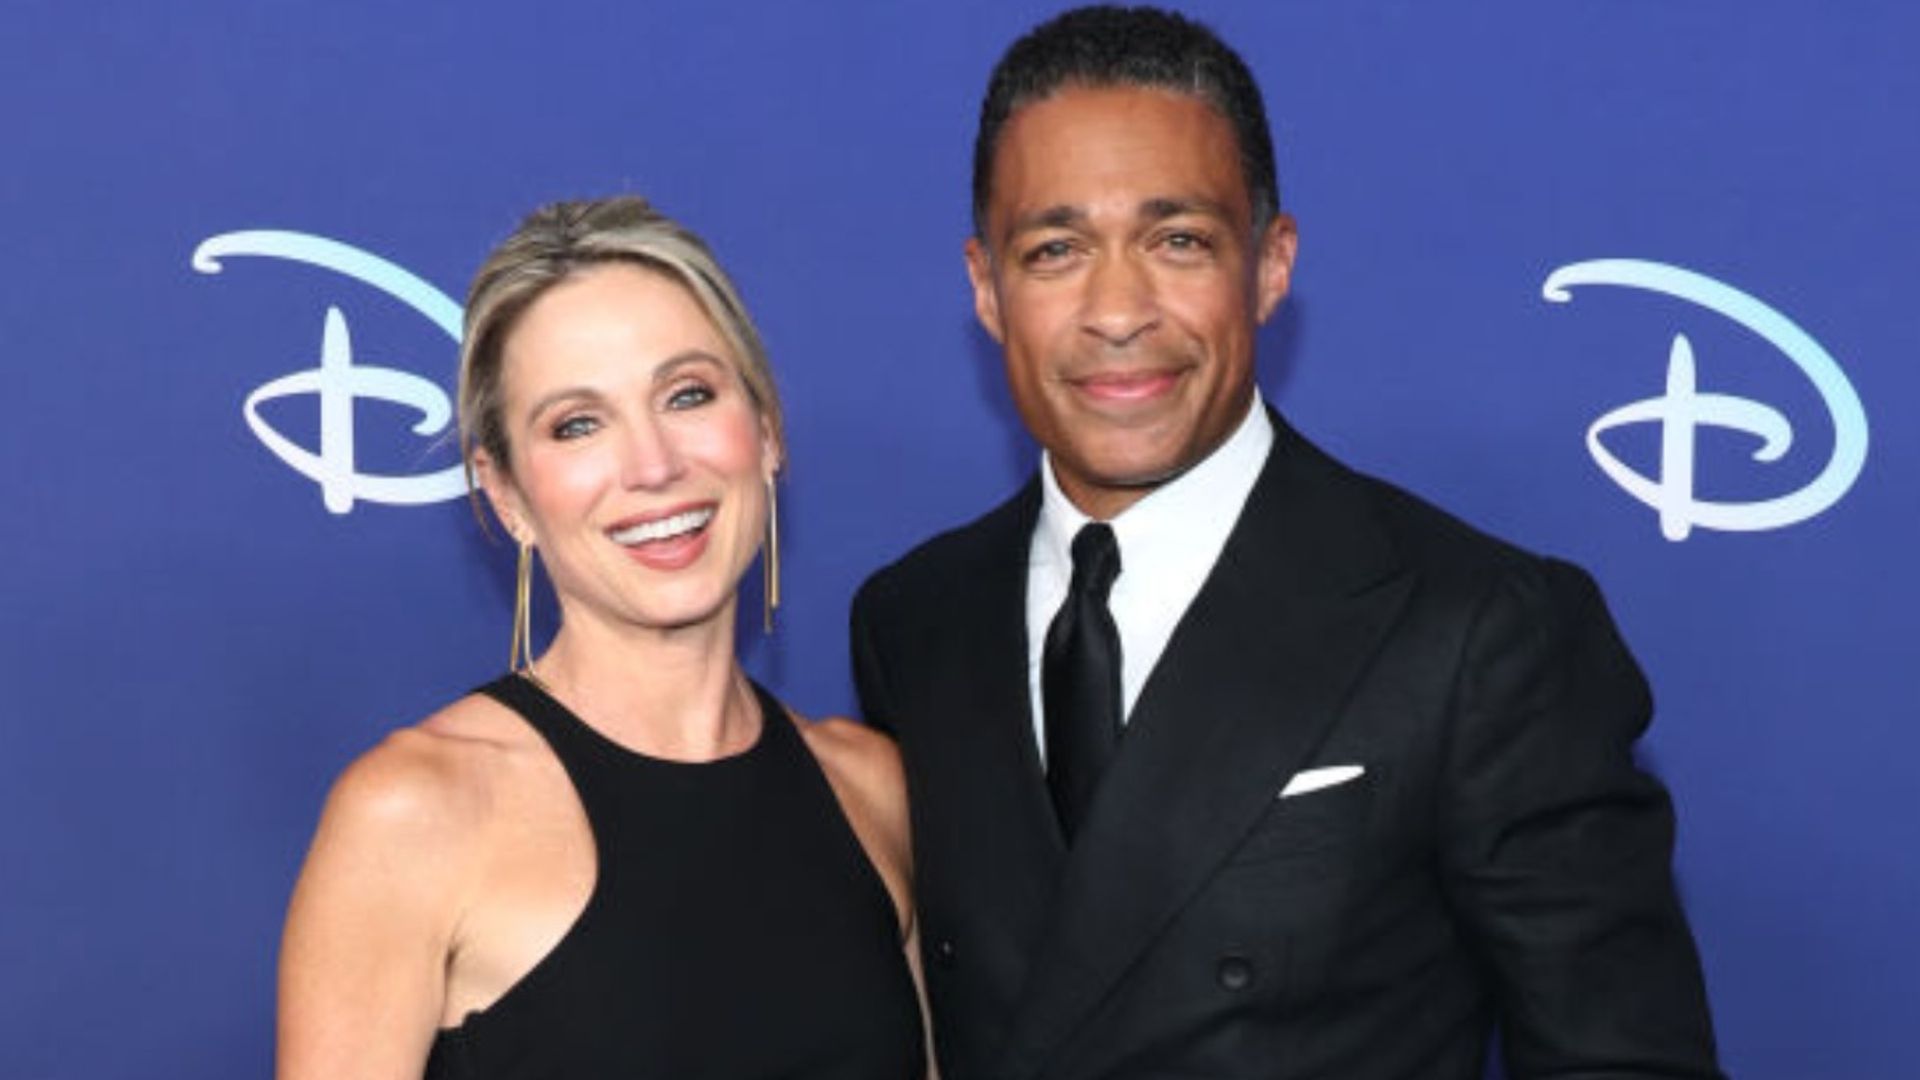 Amy Robach shows public support for boyfriend T.J. Holmes following his defiant message